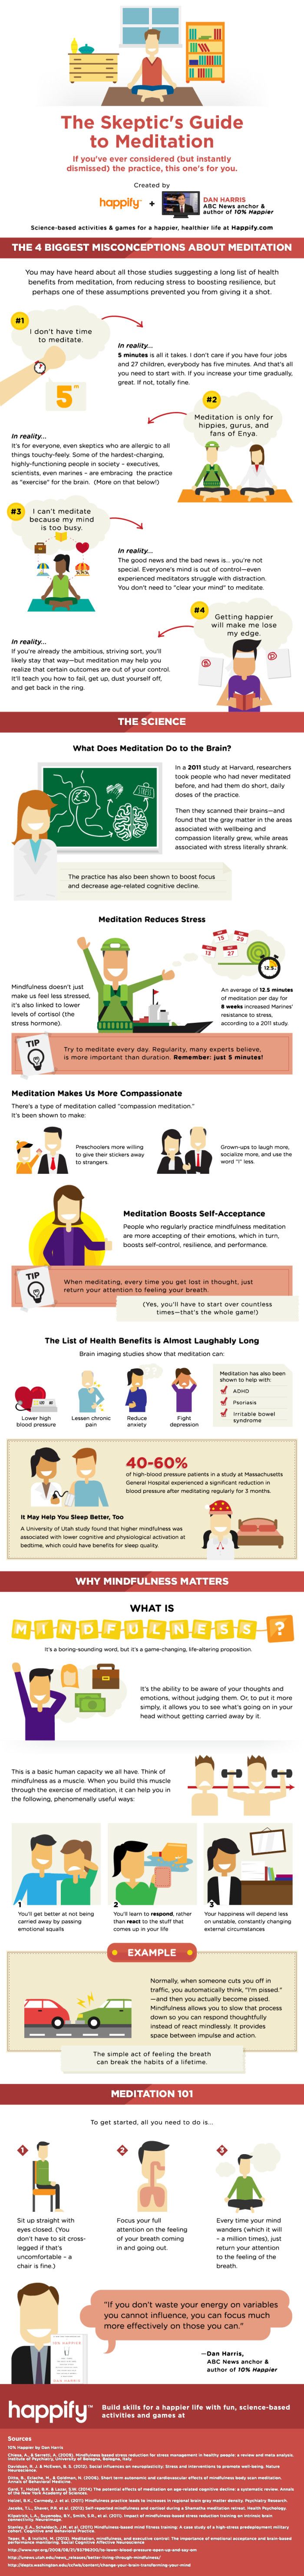 Psychology-Infographic-The-Skeptics-Guide-To-Meditation-Infographic Psychology Infographic : The Skeptic's Guide To Meditation (Infographic)